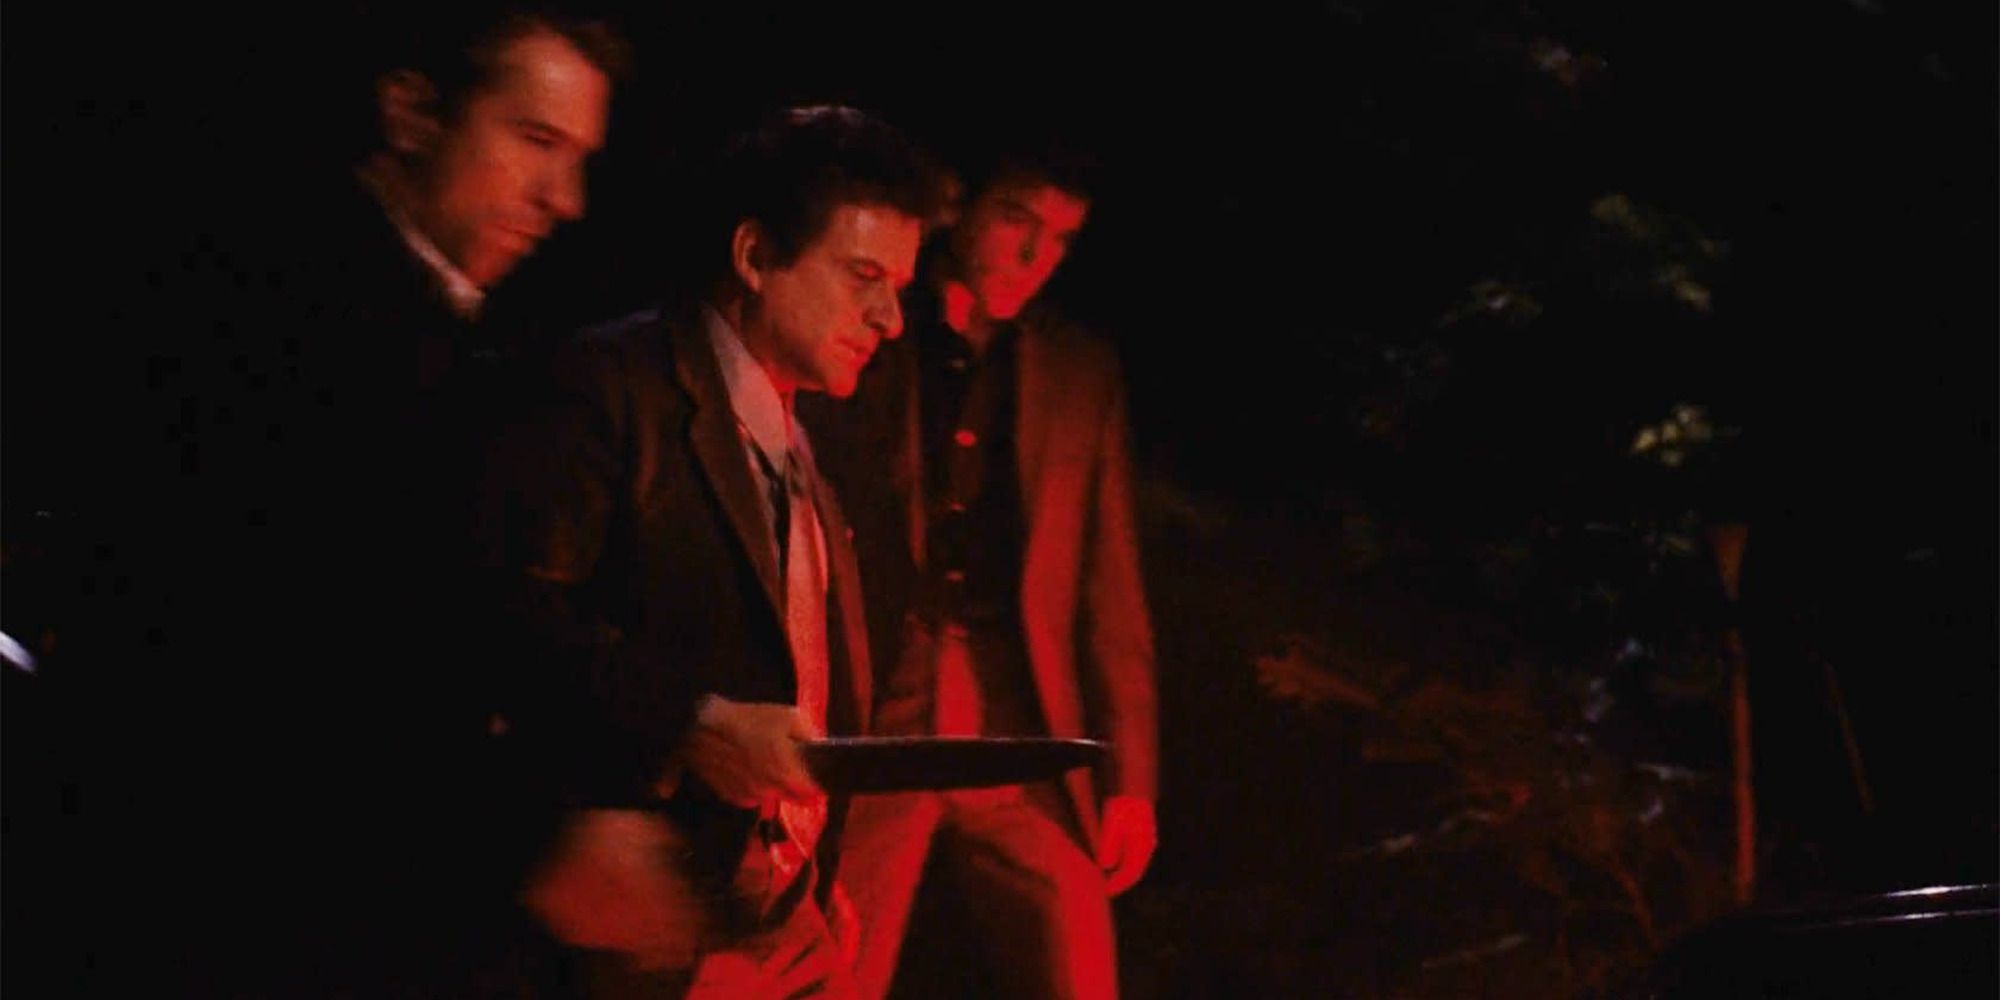 three men, one armed with a knife, looking at a car's trunk